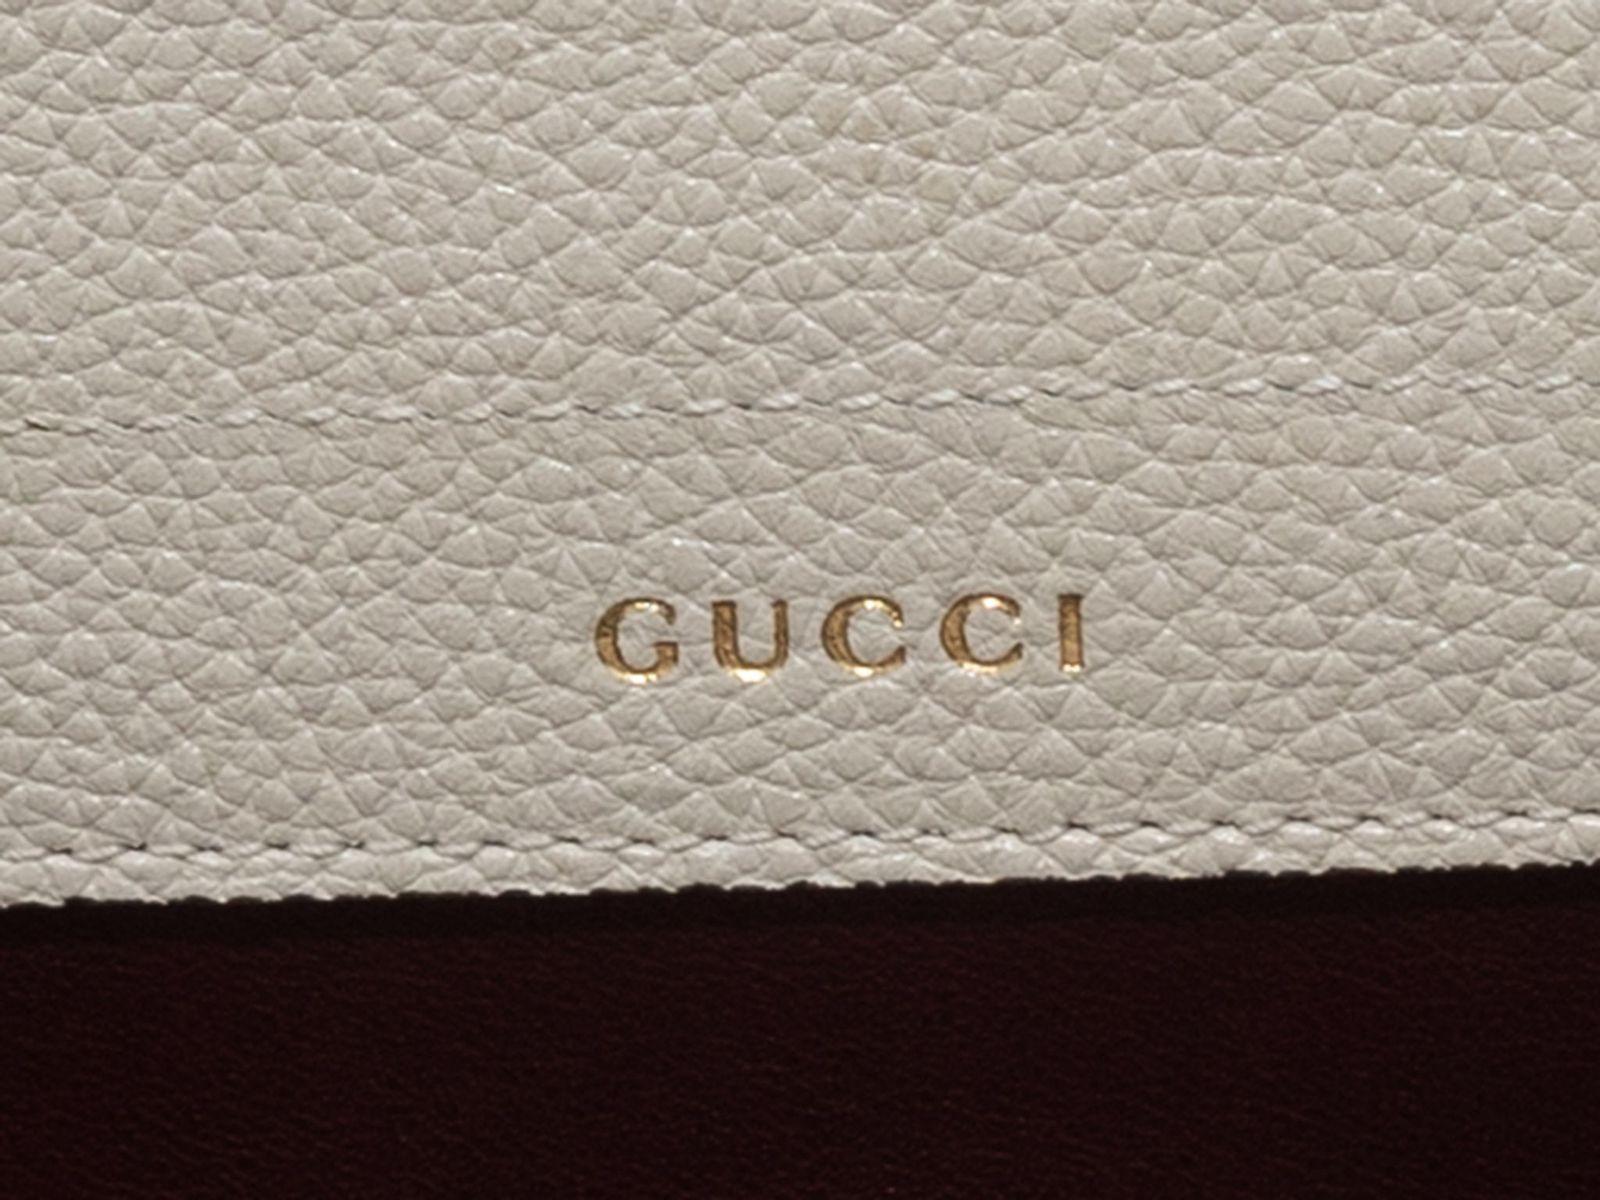 Product Details: White Gucci Medium Zumi Leather Handbag. The Zumi Handbag features a leather body, silver-tone and gold-tone hardware, dual interior zip pockets, dual flat top handles, a single flat shoulder strap, and front GG Horsebit adornment.